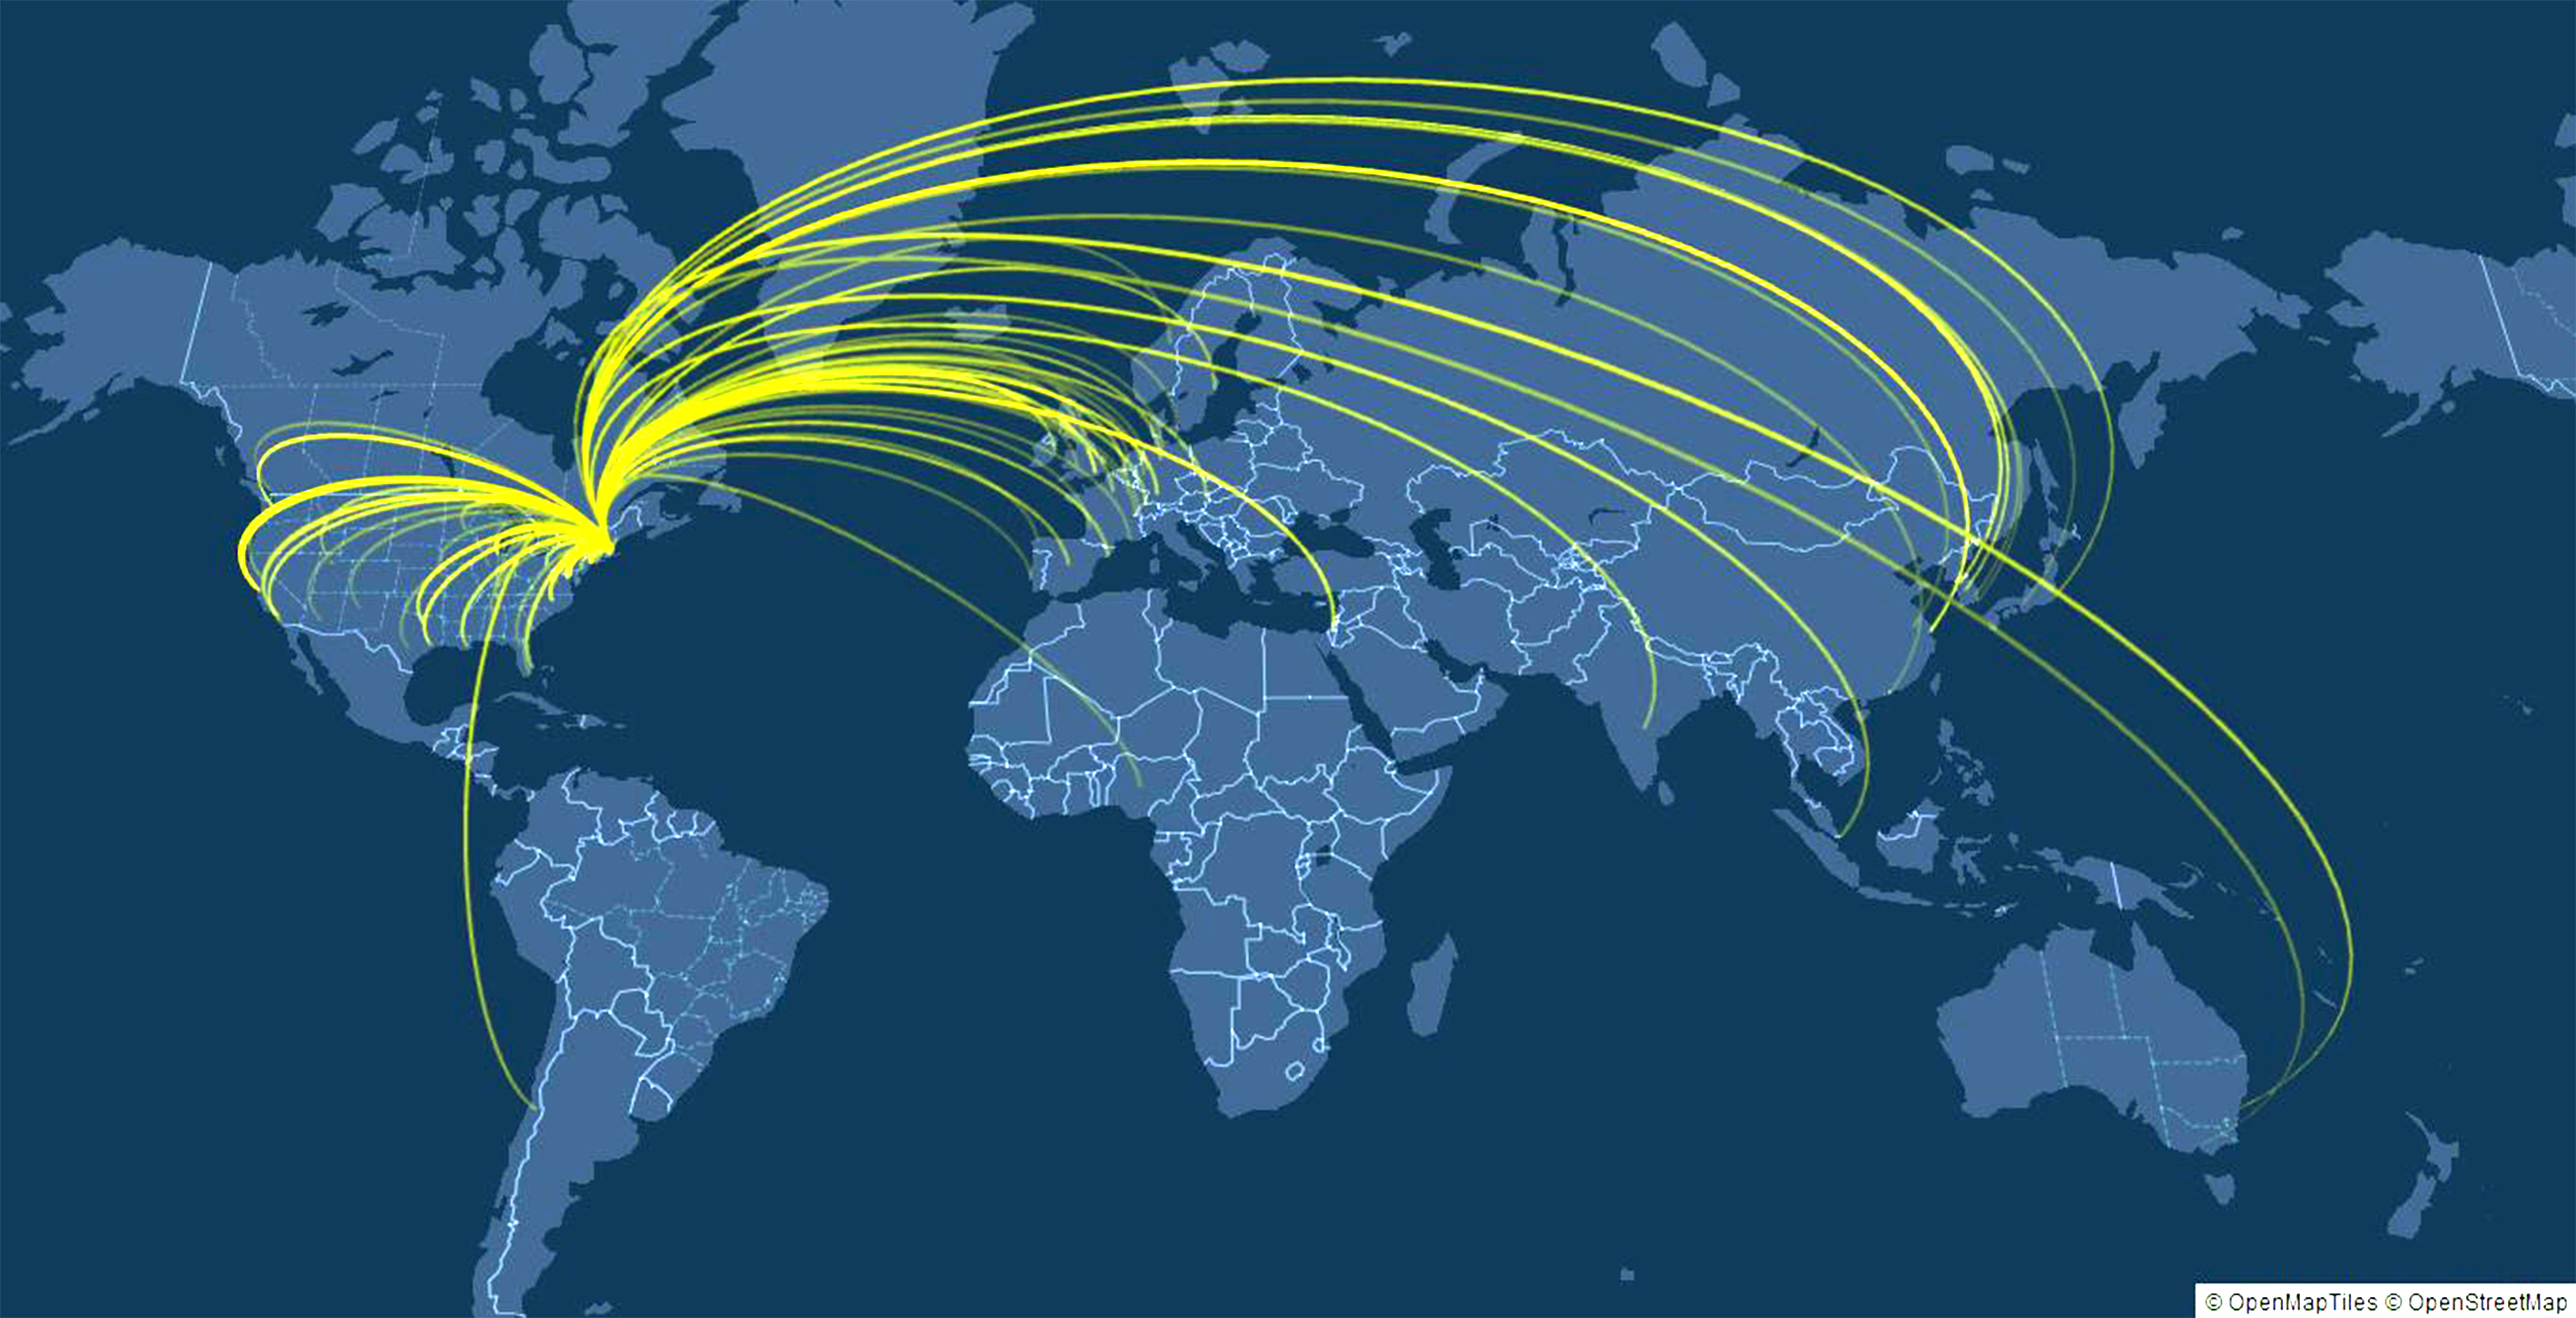 A blue-hued world map shows yellow arcs projecting from Boston to points all over the world, especially Asia and Europe